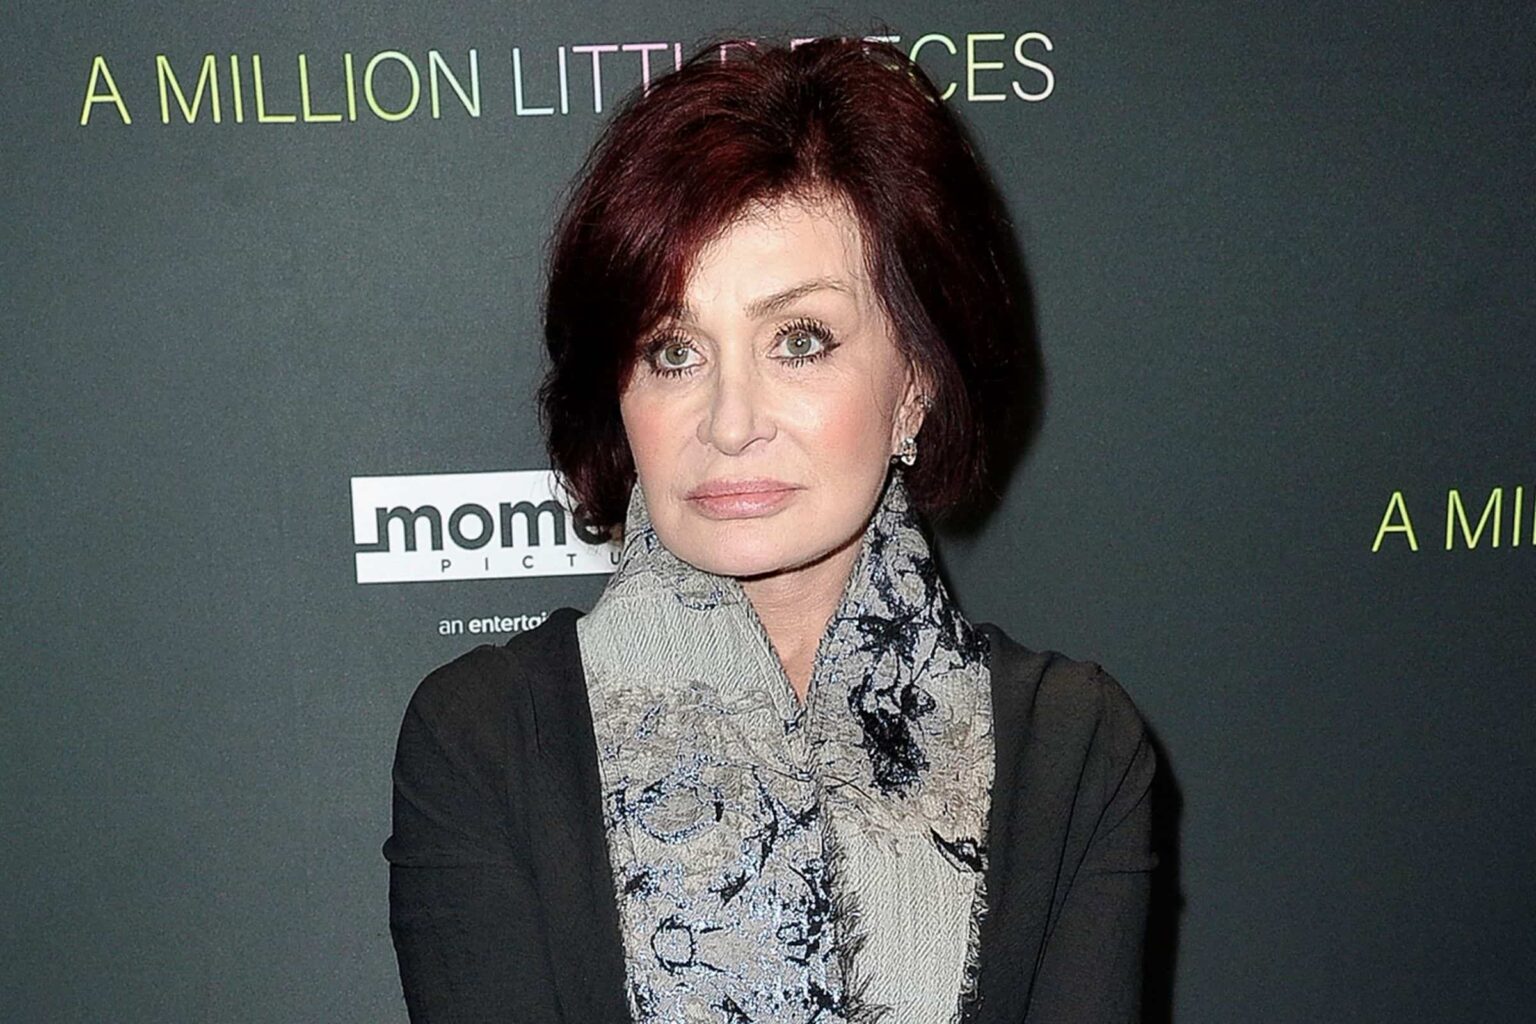 After a controversial exit from 'The Talk', Sharon Osbourne shares how her mental health was affected. Read her latest interview on the on-air incident.